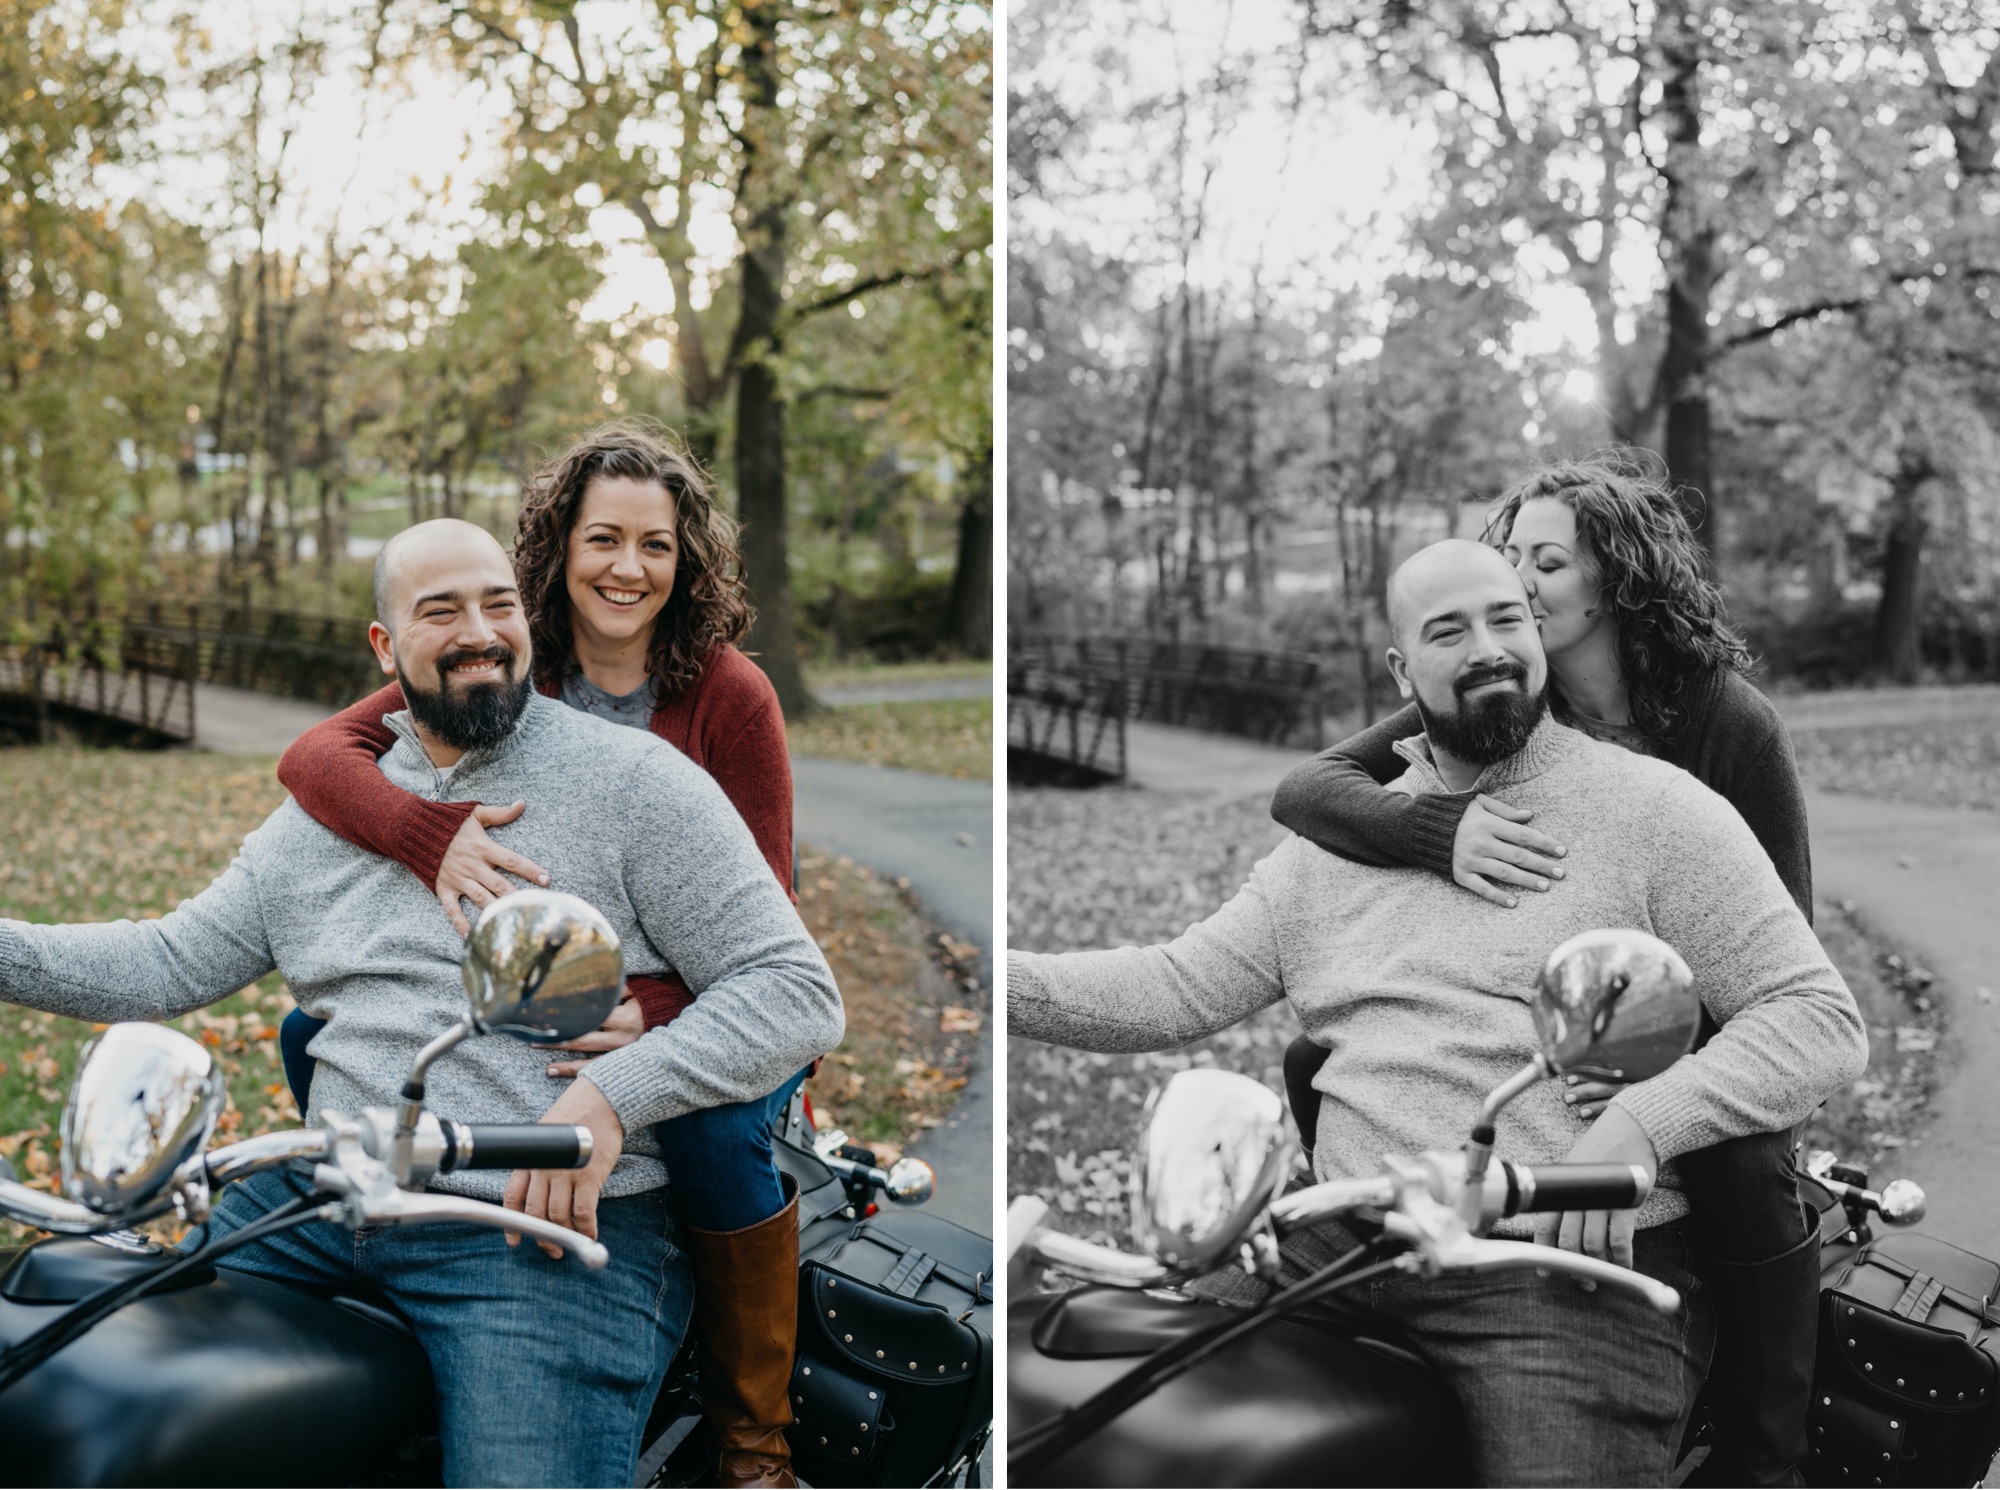 couple on motorcycle in antioch park engagement